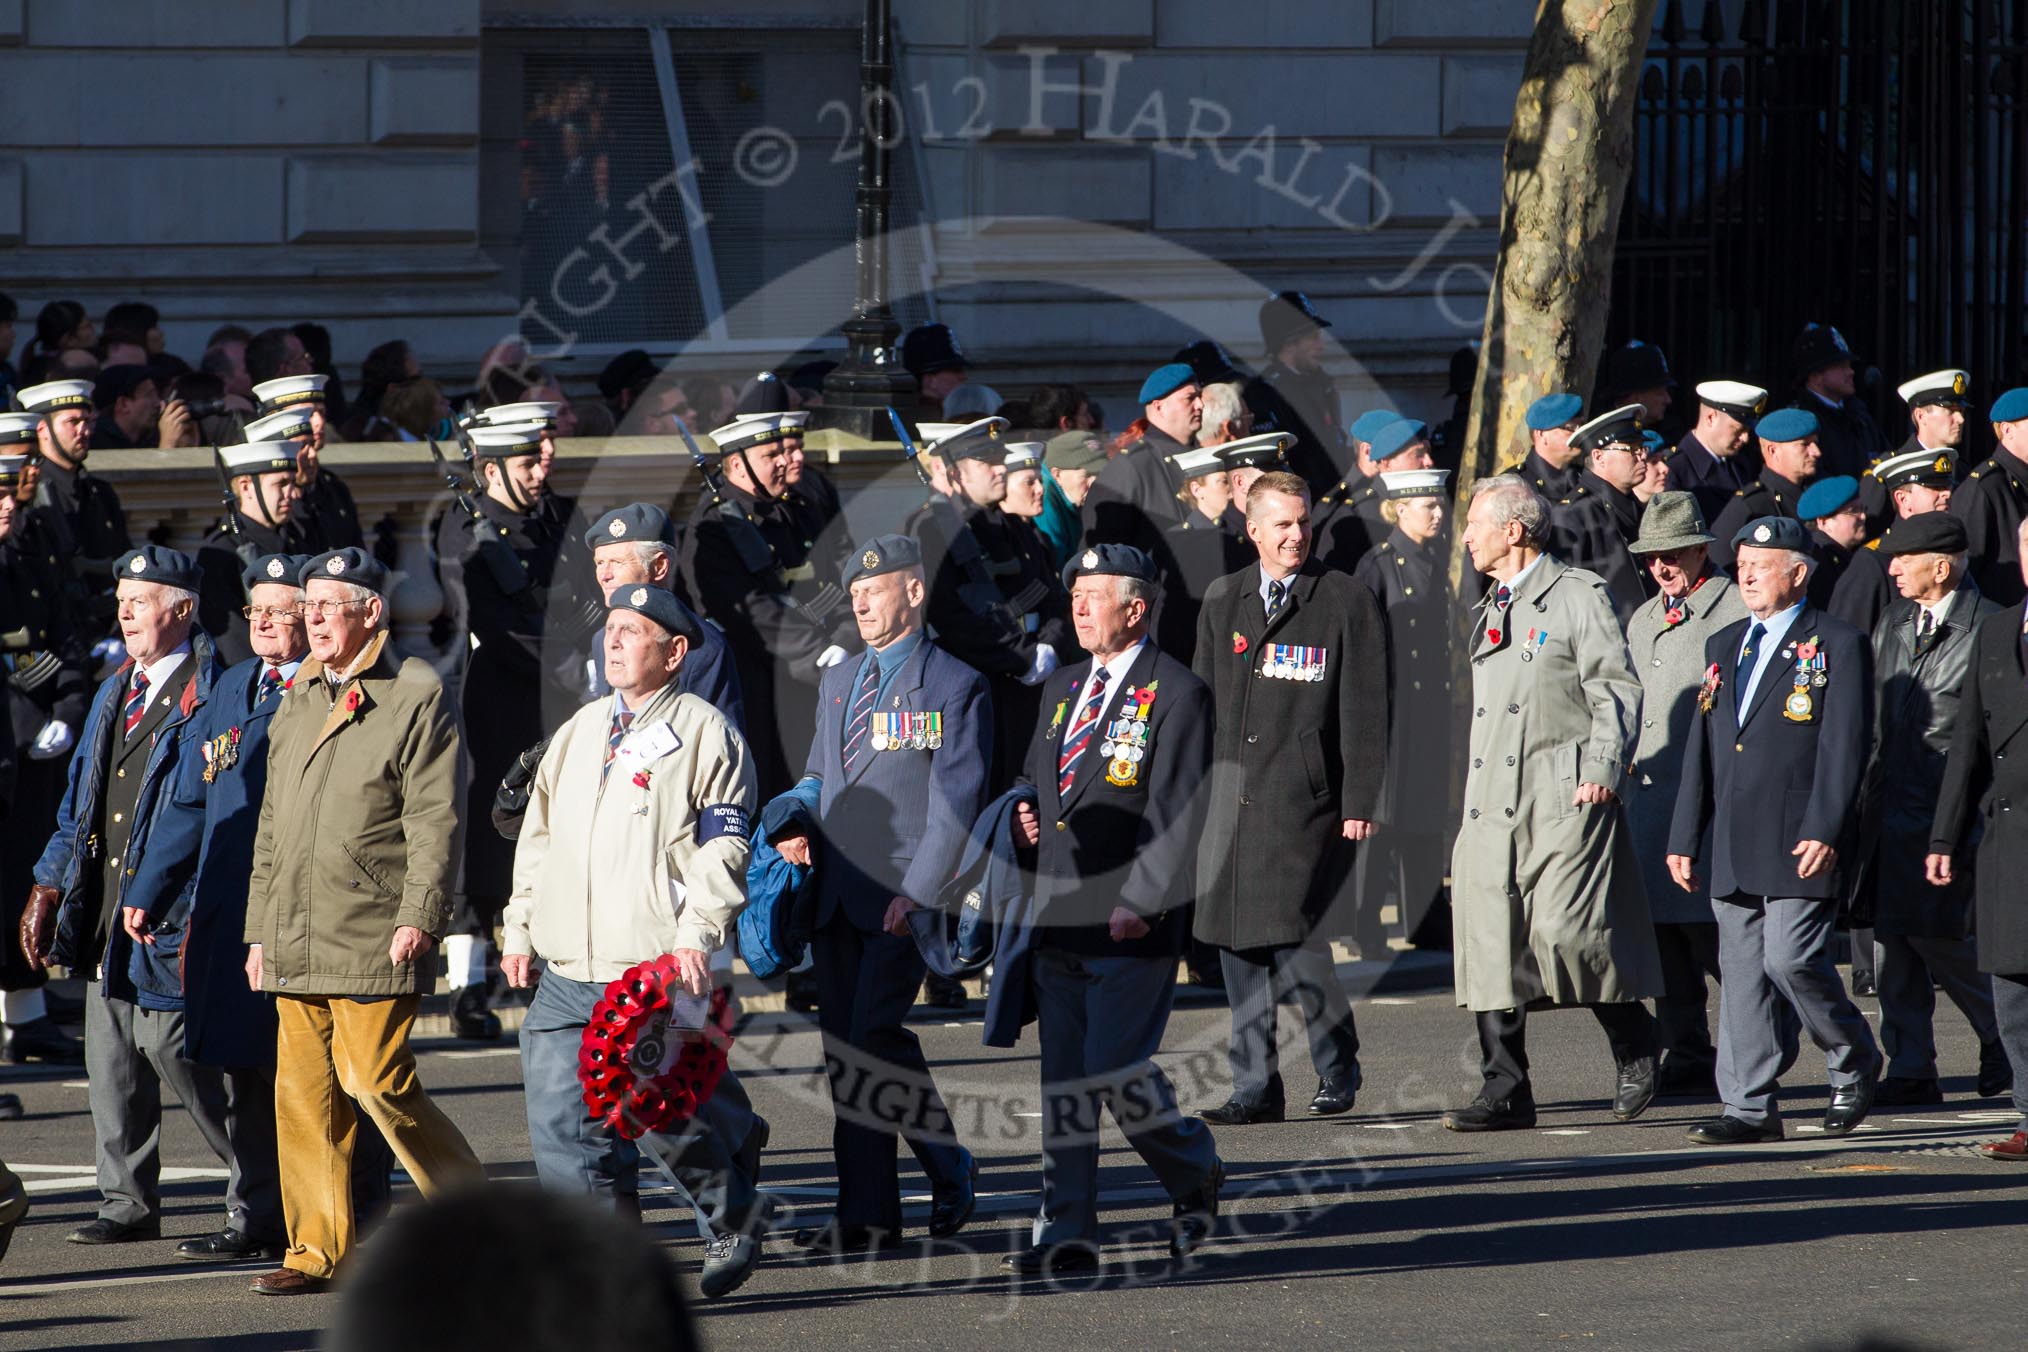 Remembrance Sunday 2012 Cenotaph March Past: Group C4 - Royal Air Force Yatesbury Association, and C5 - Royal Air Force Airfield Construction Branch Association..
Whitehall, Cenotaph,
London SW1,

United Kingdom,
on 11 November 2012 at 12:01, image #1093